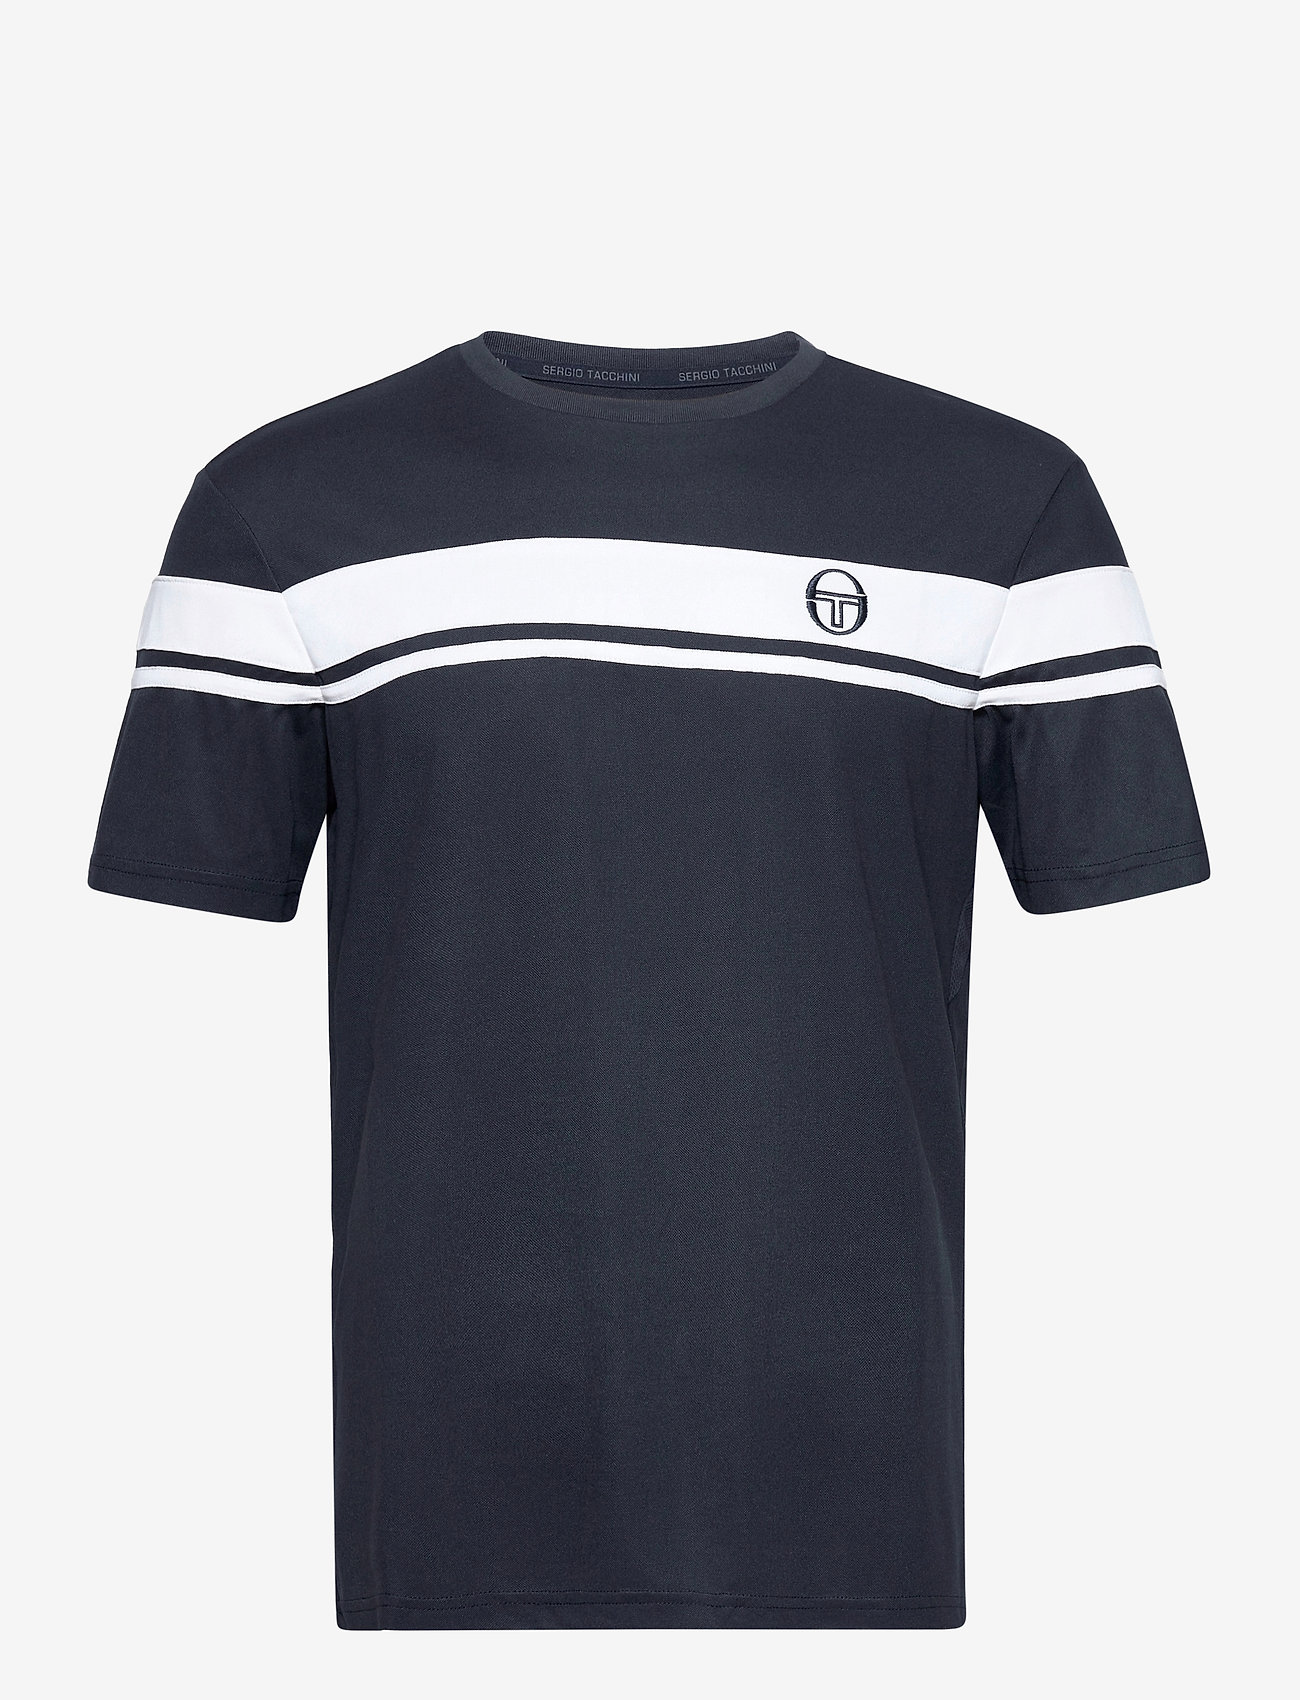 Sergio Tacchini - YOUNG LINE PRO T-SHIRT - t-shirts med print - navy/white - 0